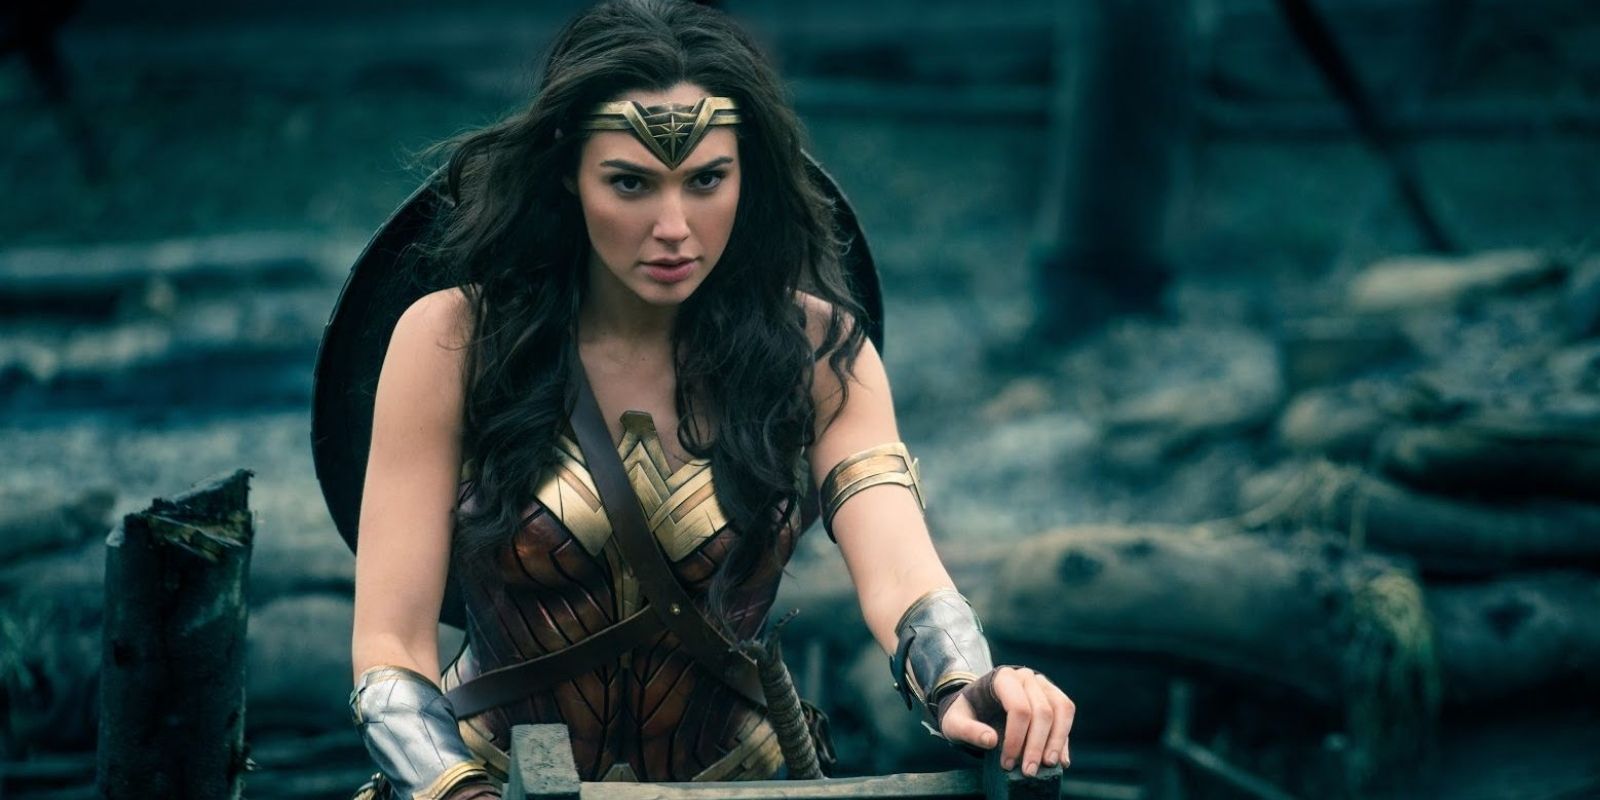 Diana Prince in her Amazon armor prepares to walk into No Man's Land in Wonder Woman